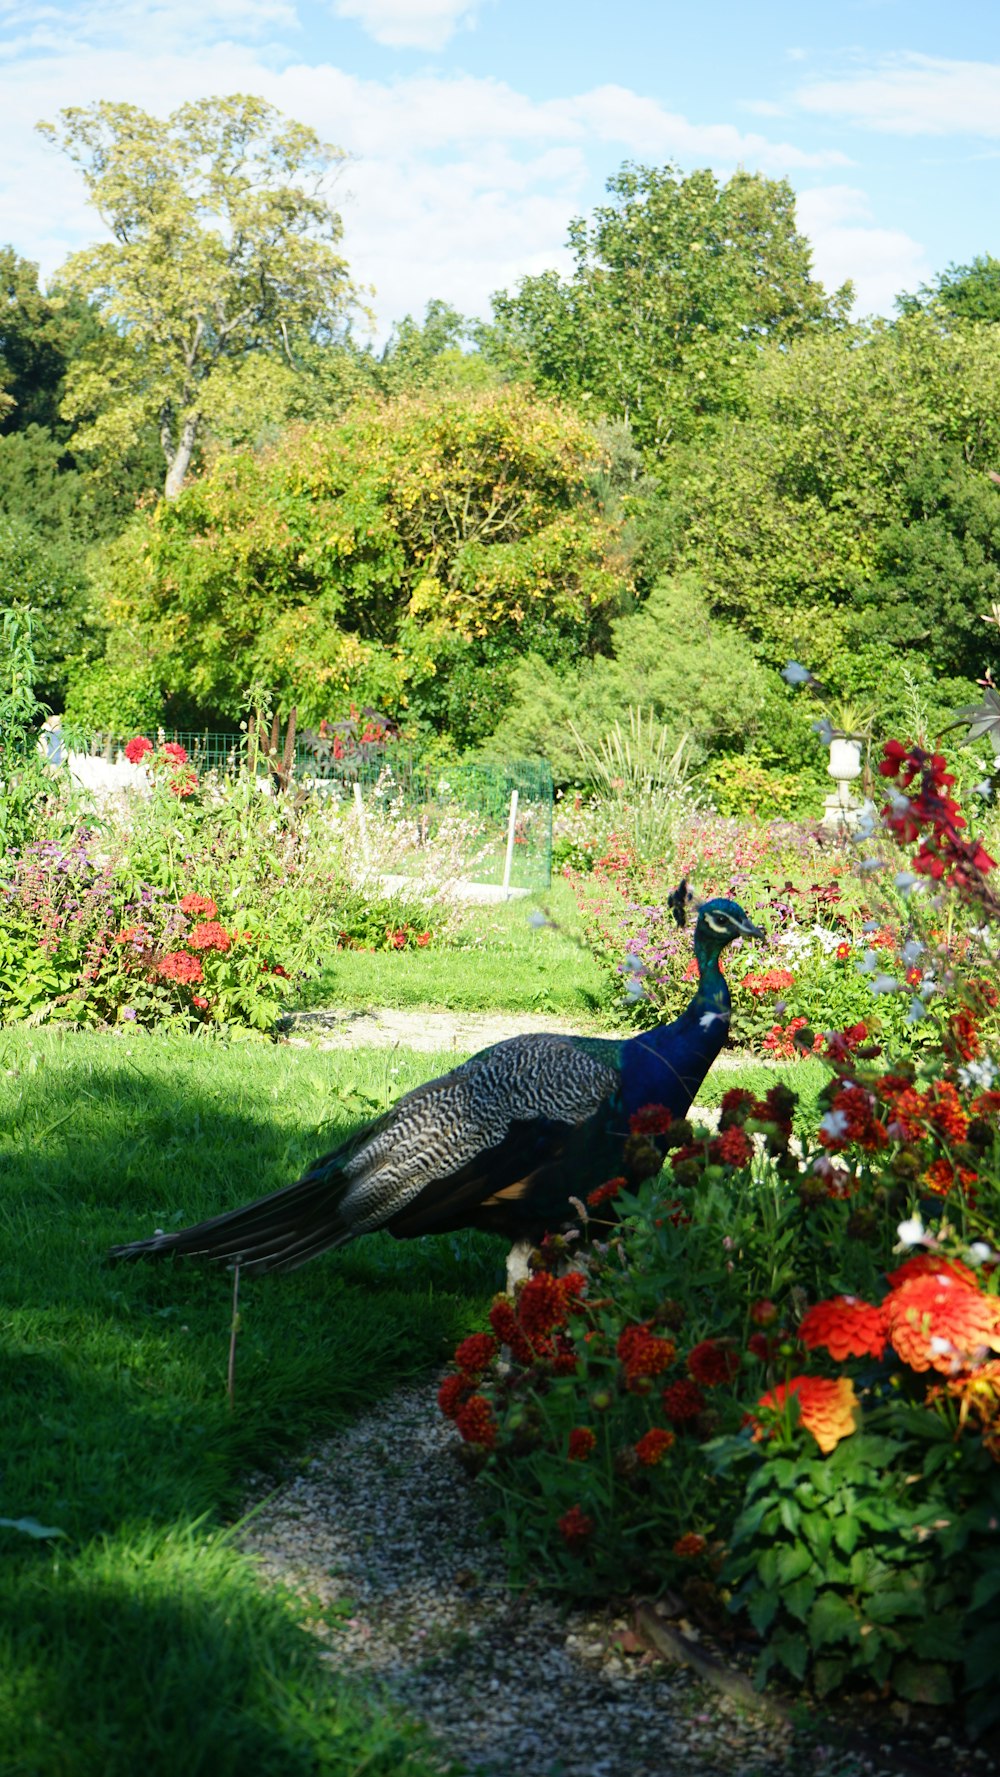 a peacock is standing in the middle of a garden